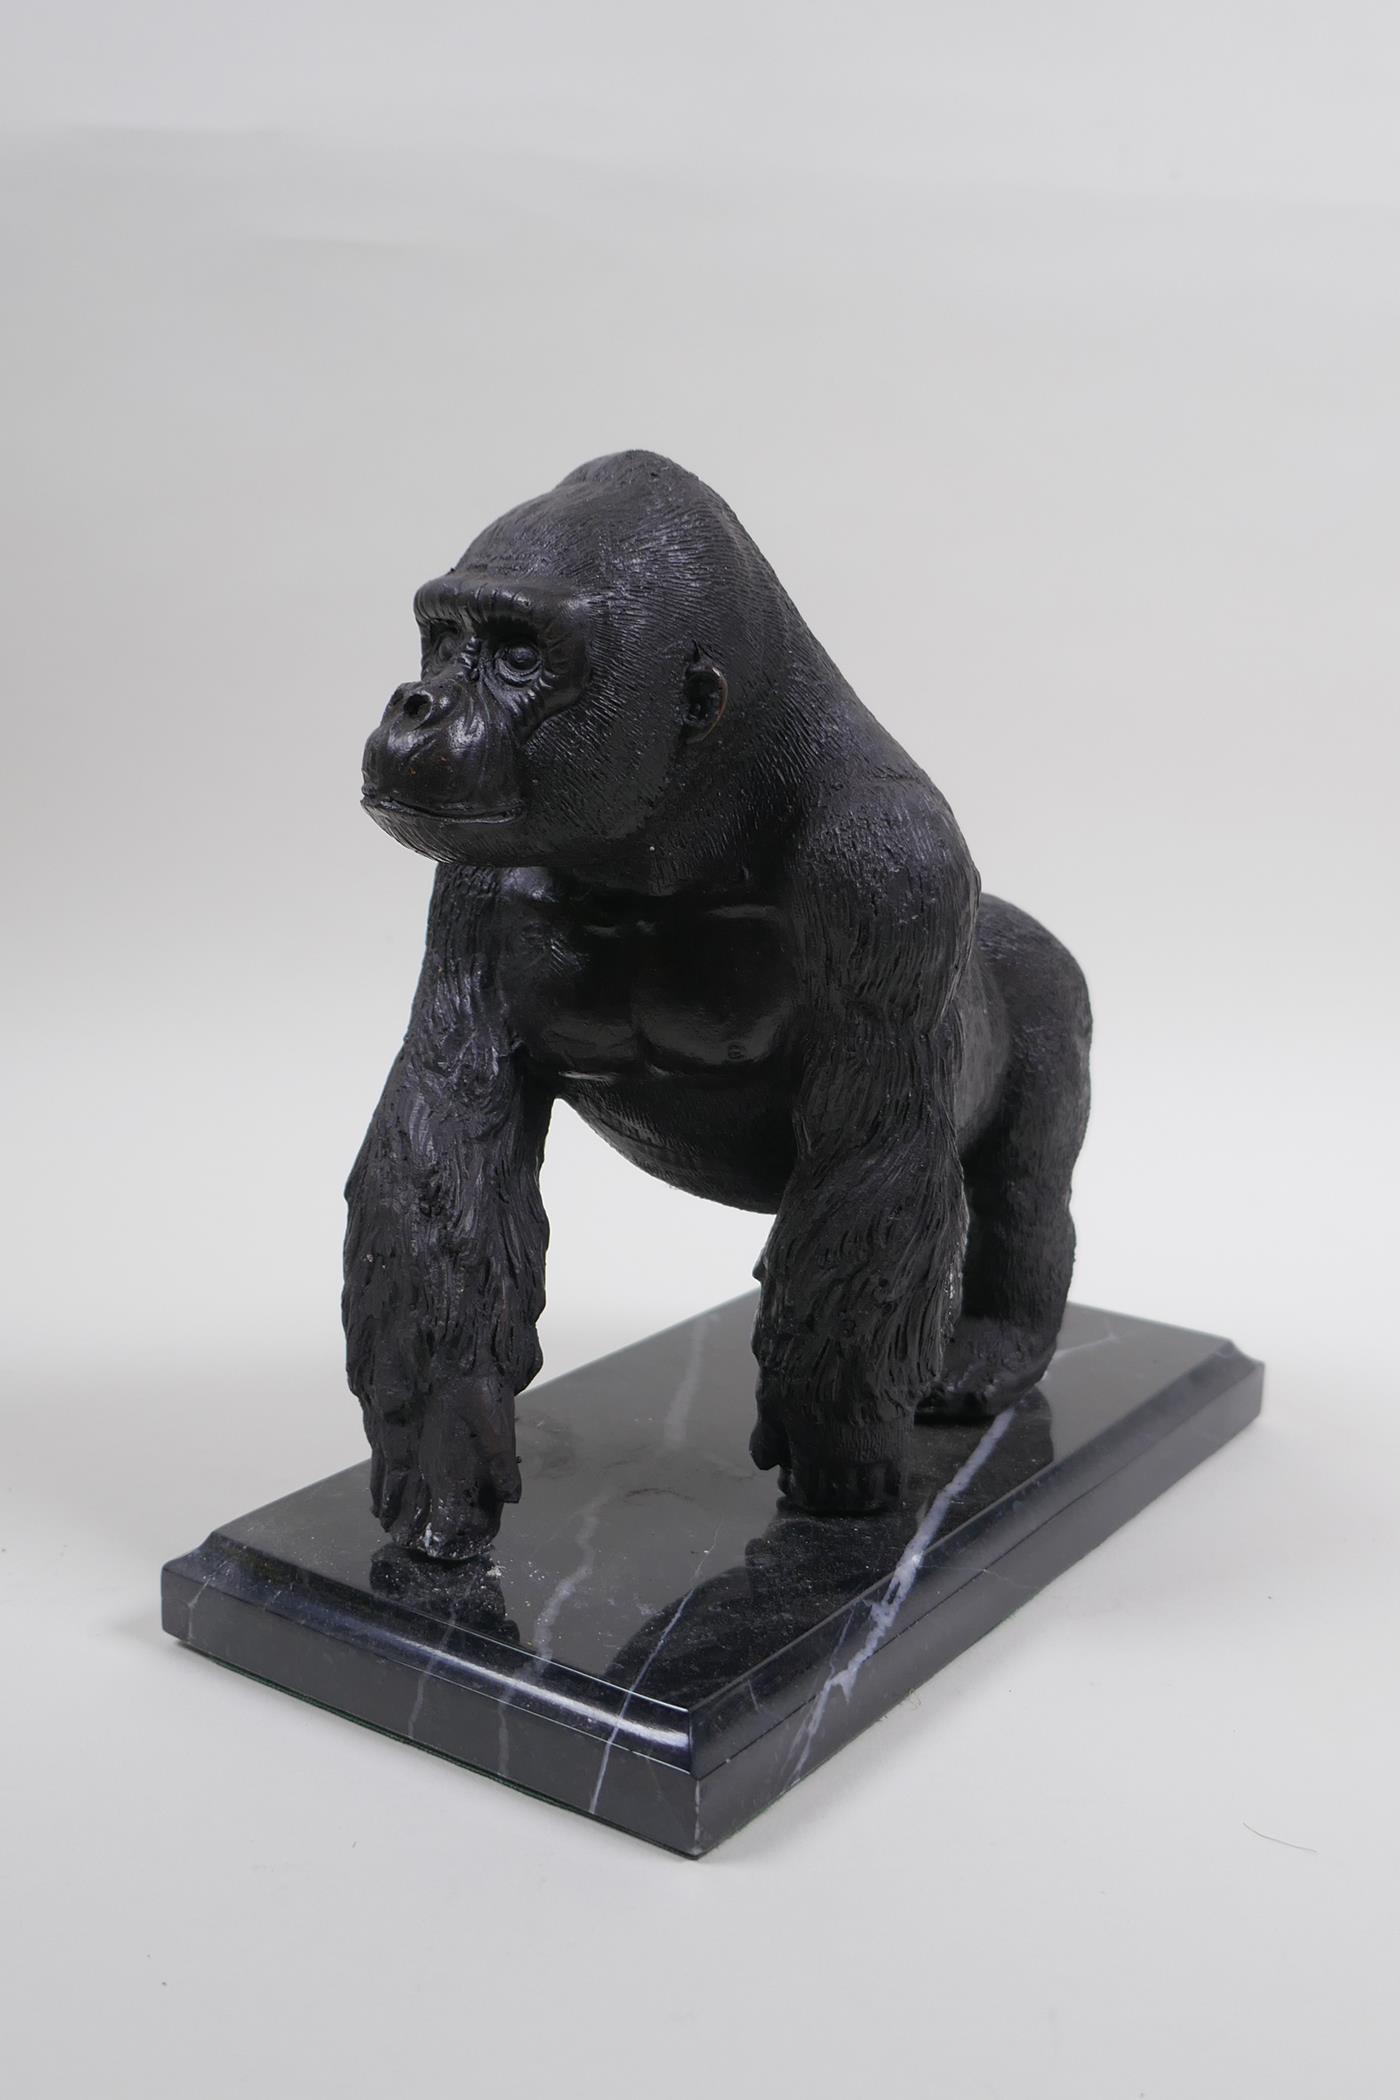 A cast bronze figure of a prowling gorilla, 18cm high - Image 2 of 5